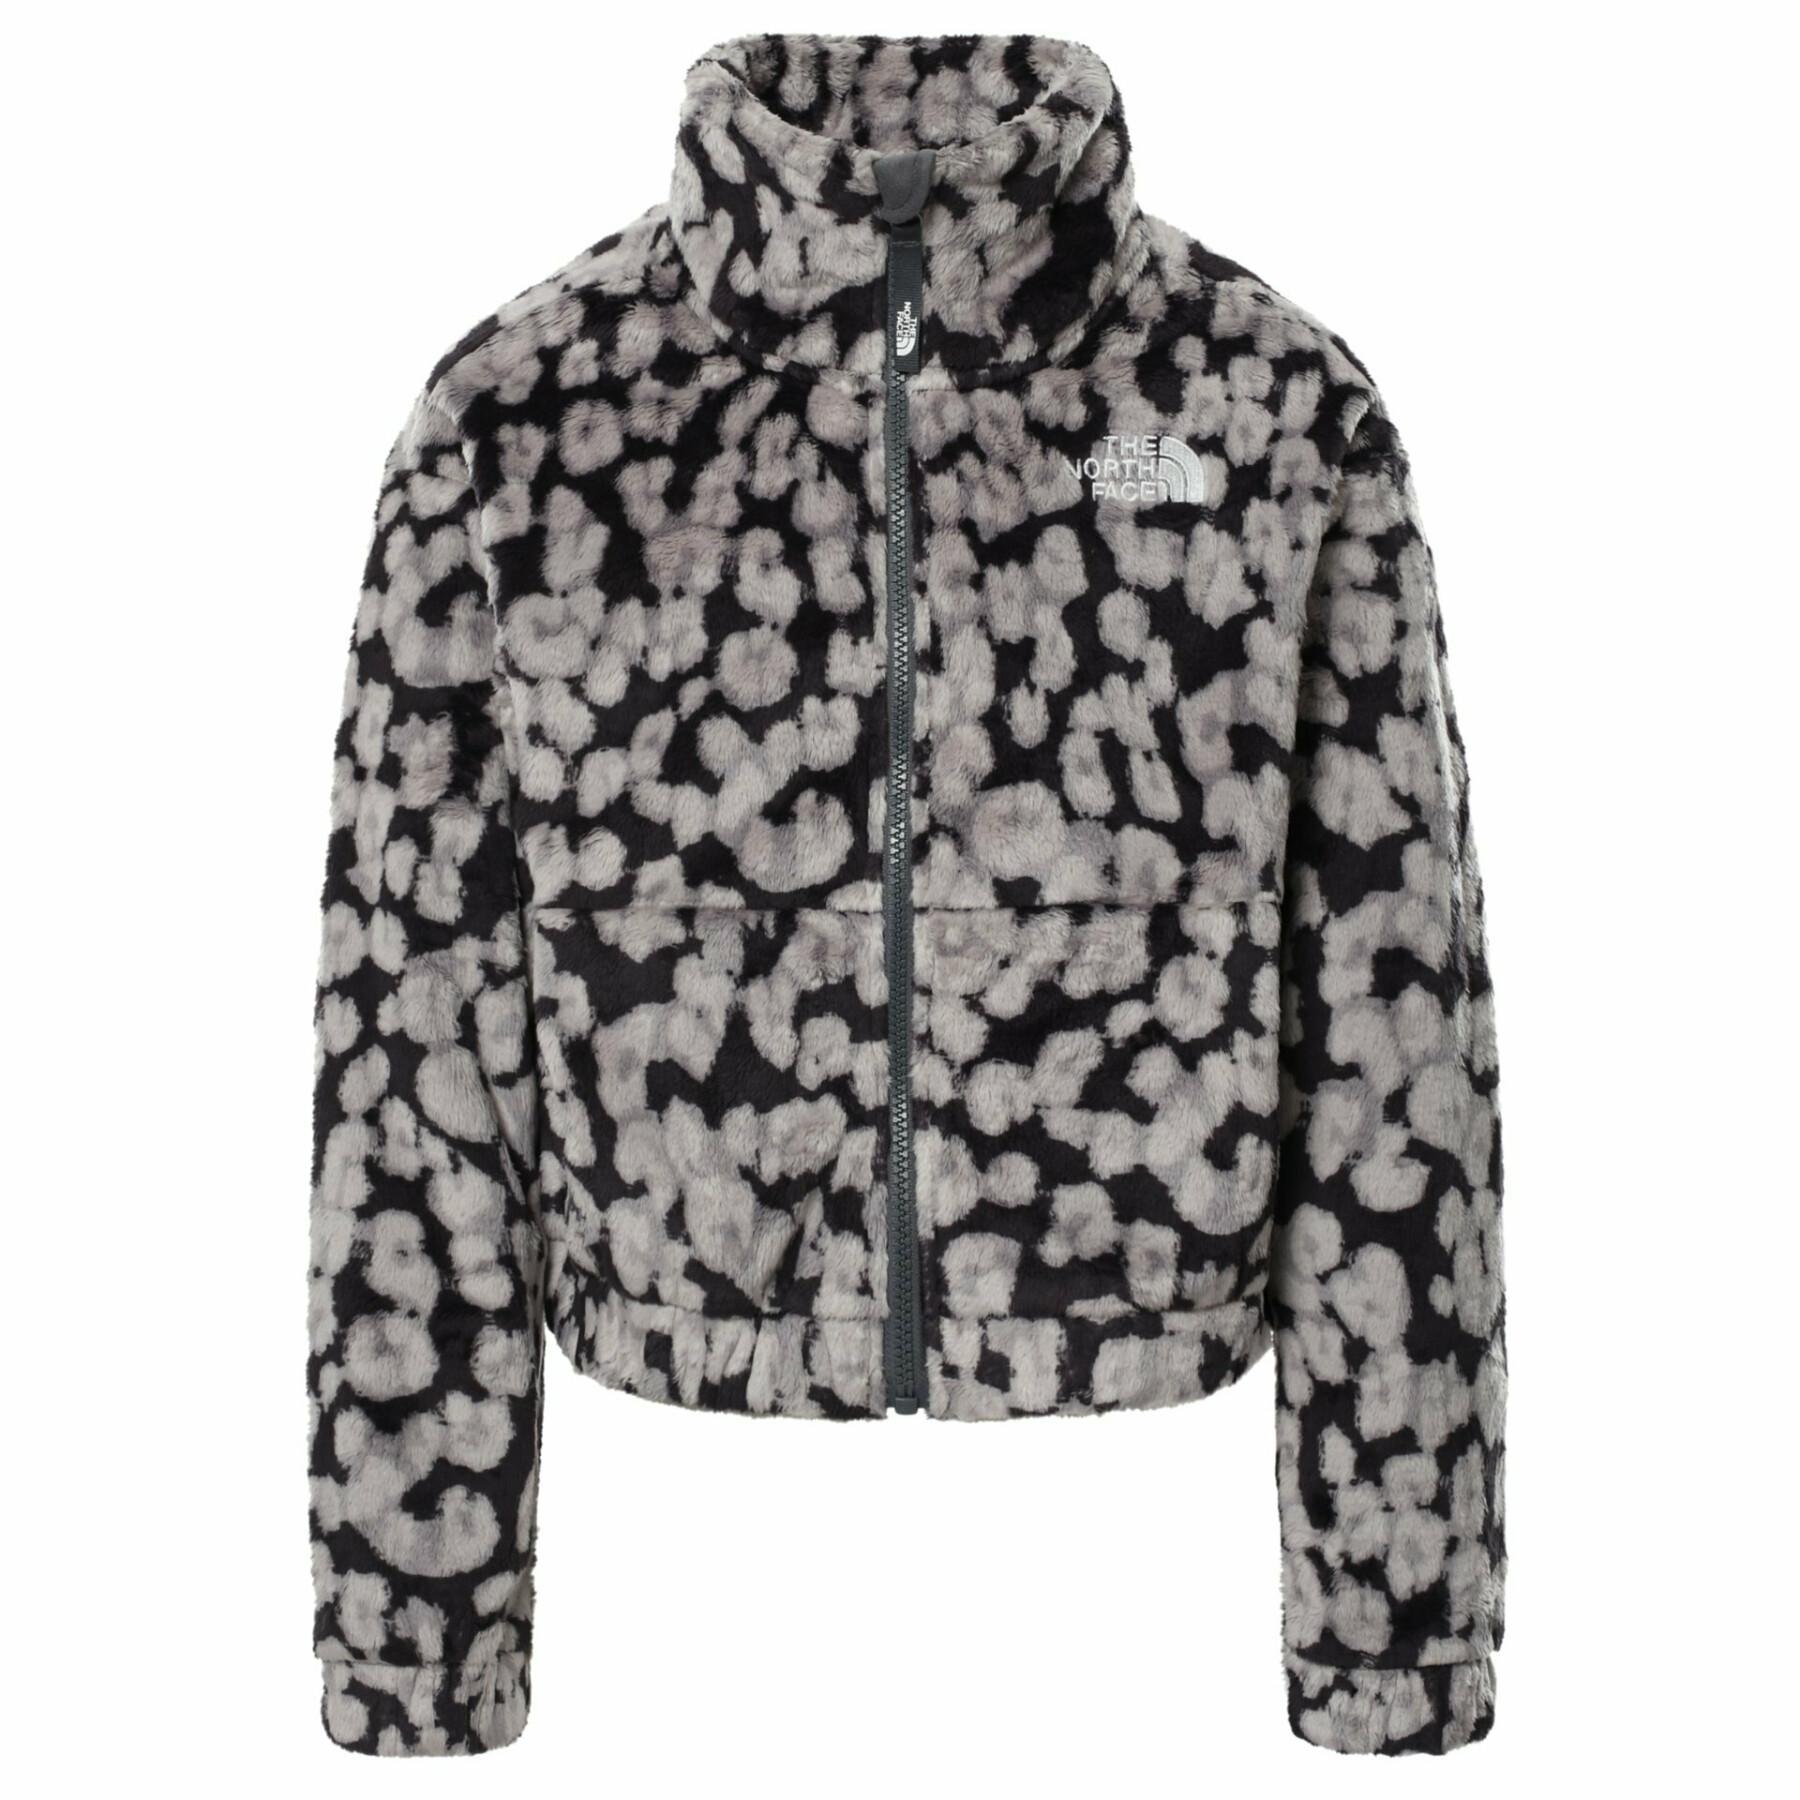 Girl's jacket The North Face Printed Osolita Fz